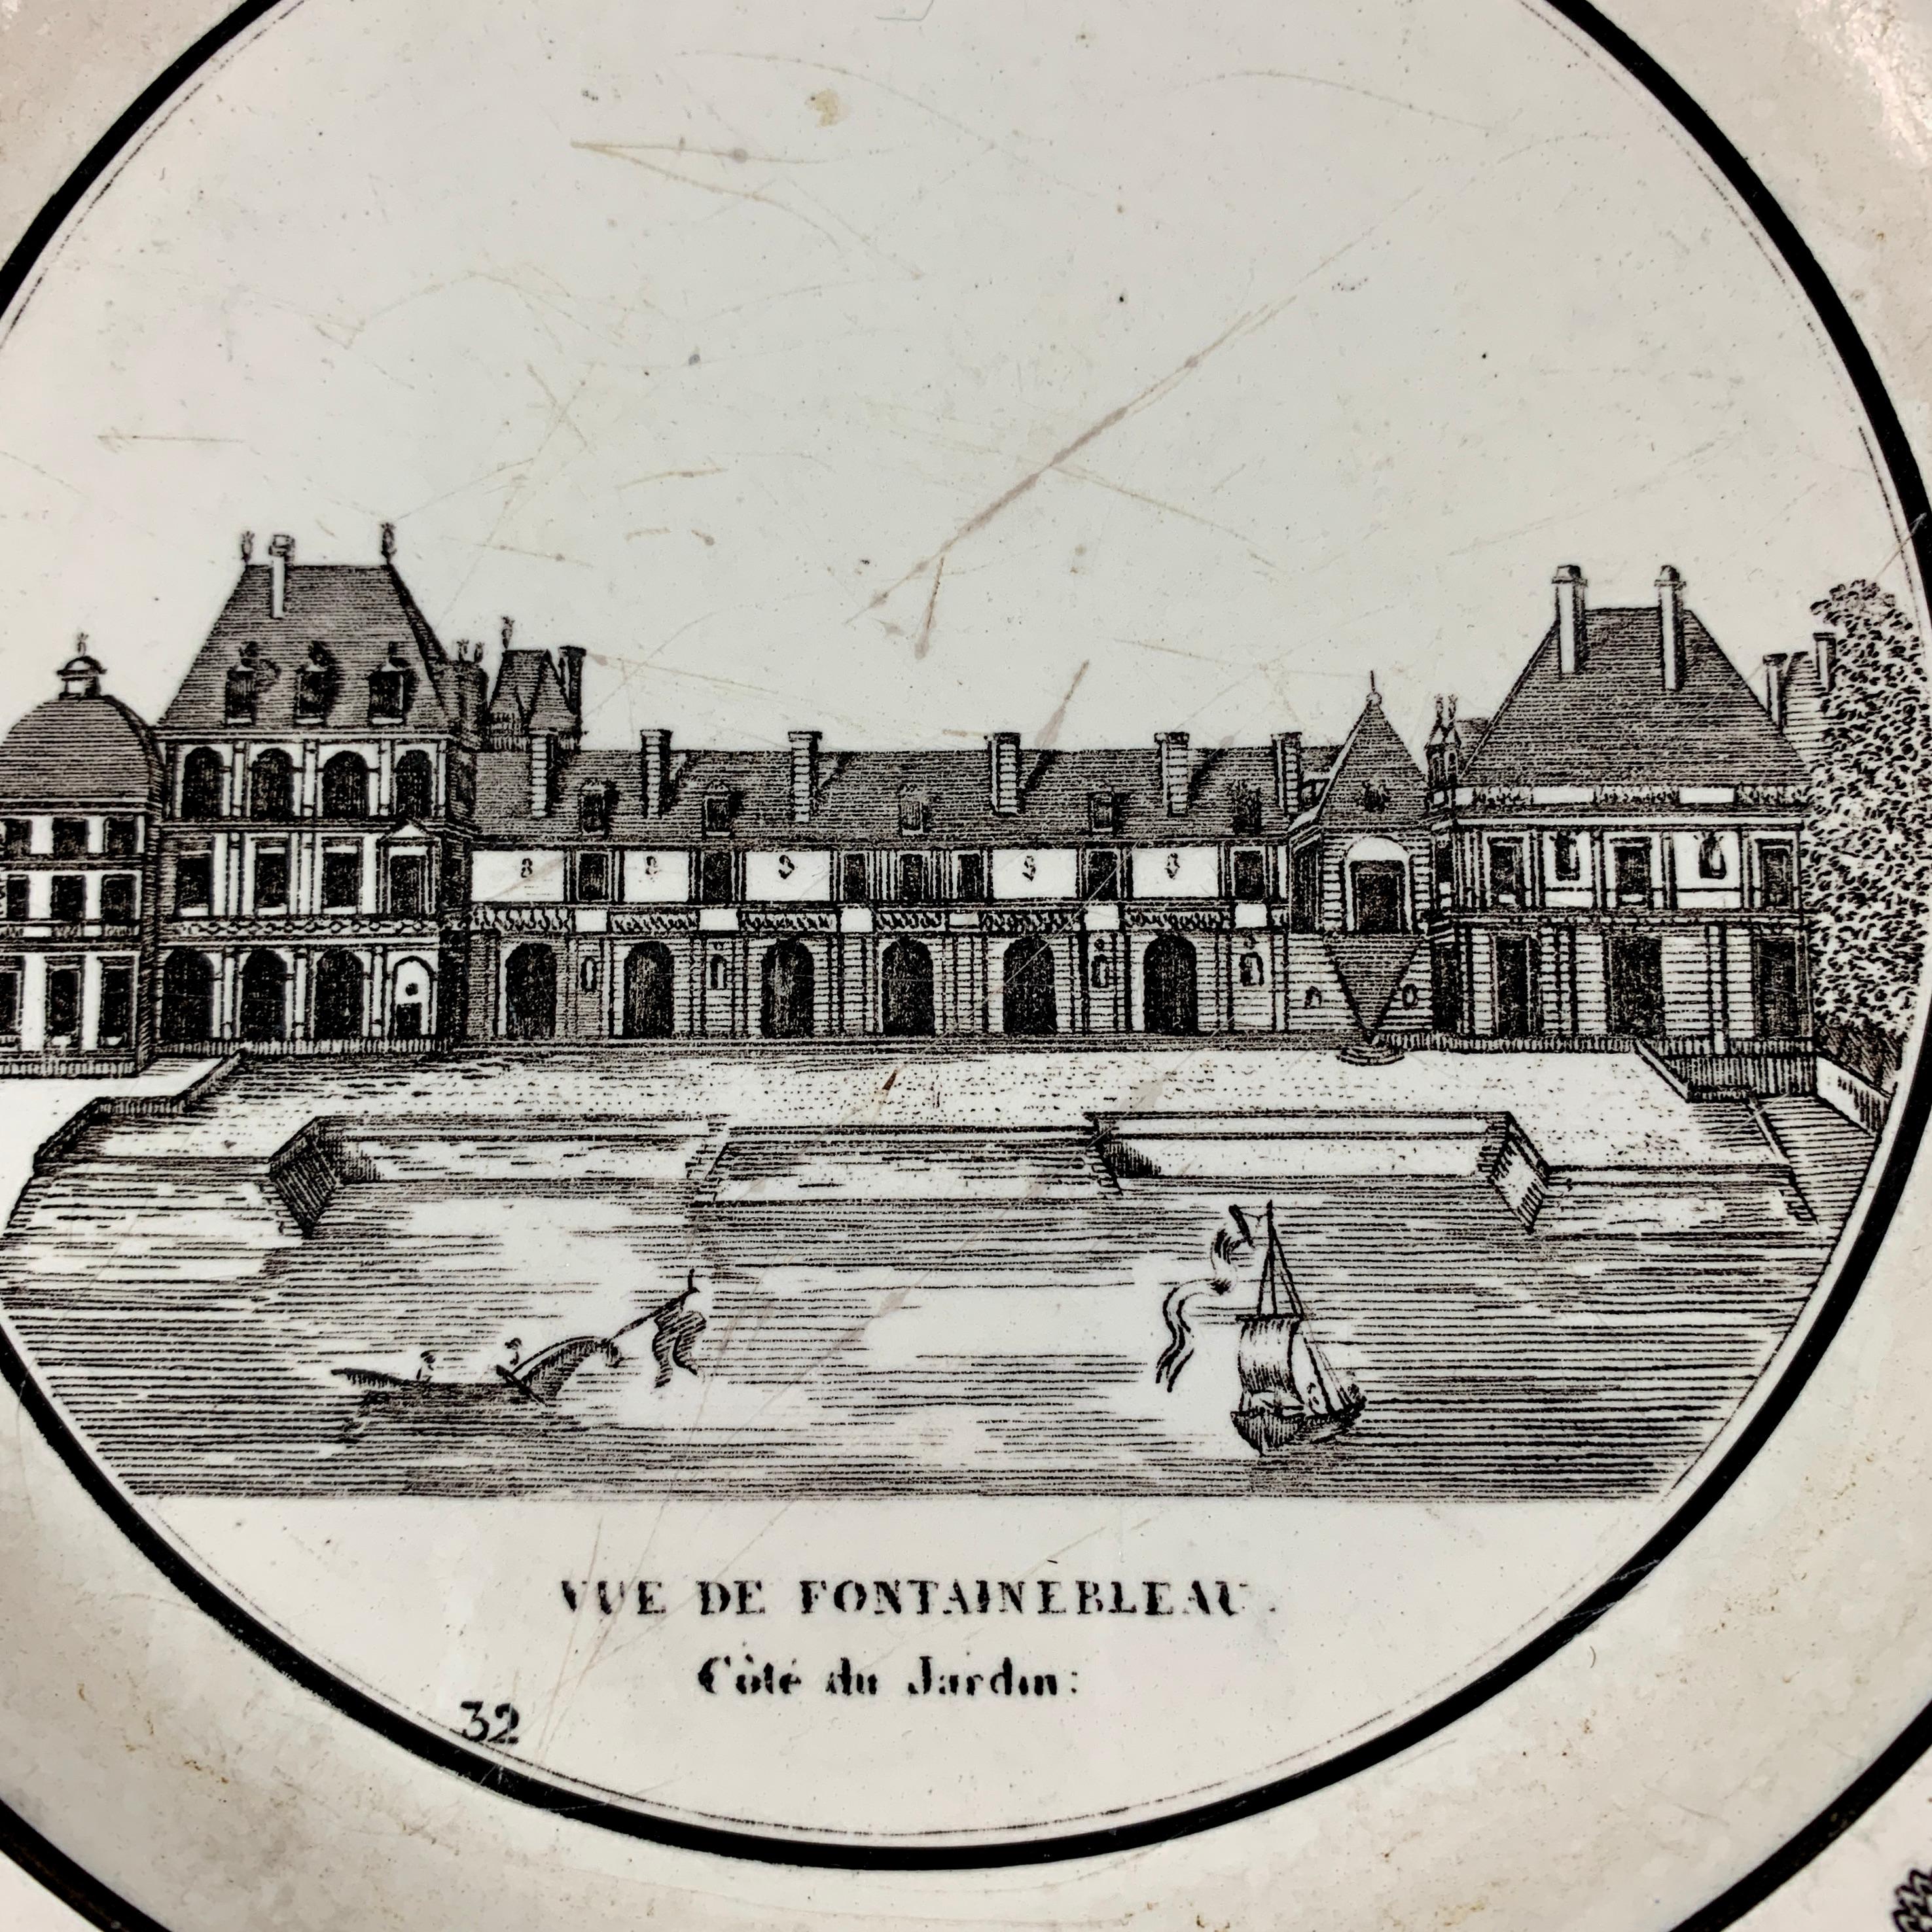 A French Neoclassical faïence transfer printed creamware plate produced by P&H Choisy, circa 1824-1836.

A black transfer of an architectural image on a creamware body, depicting the Vue de Fontainbleu à Paris. The building is prominent, with the